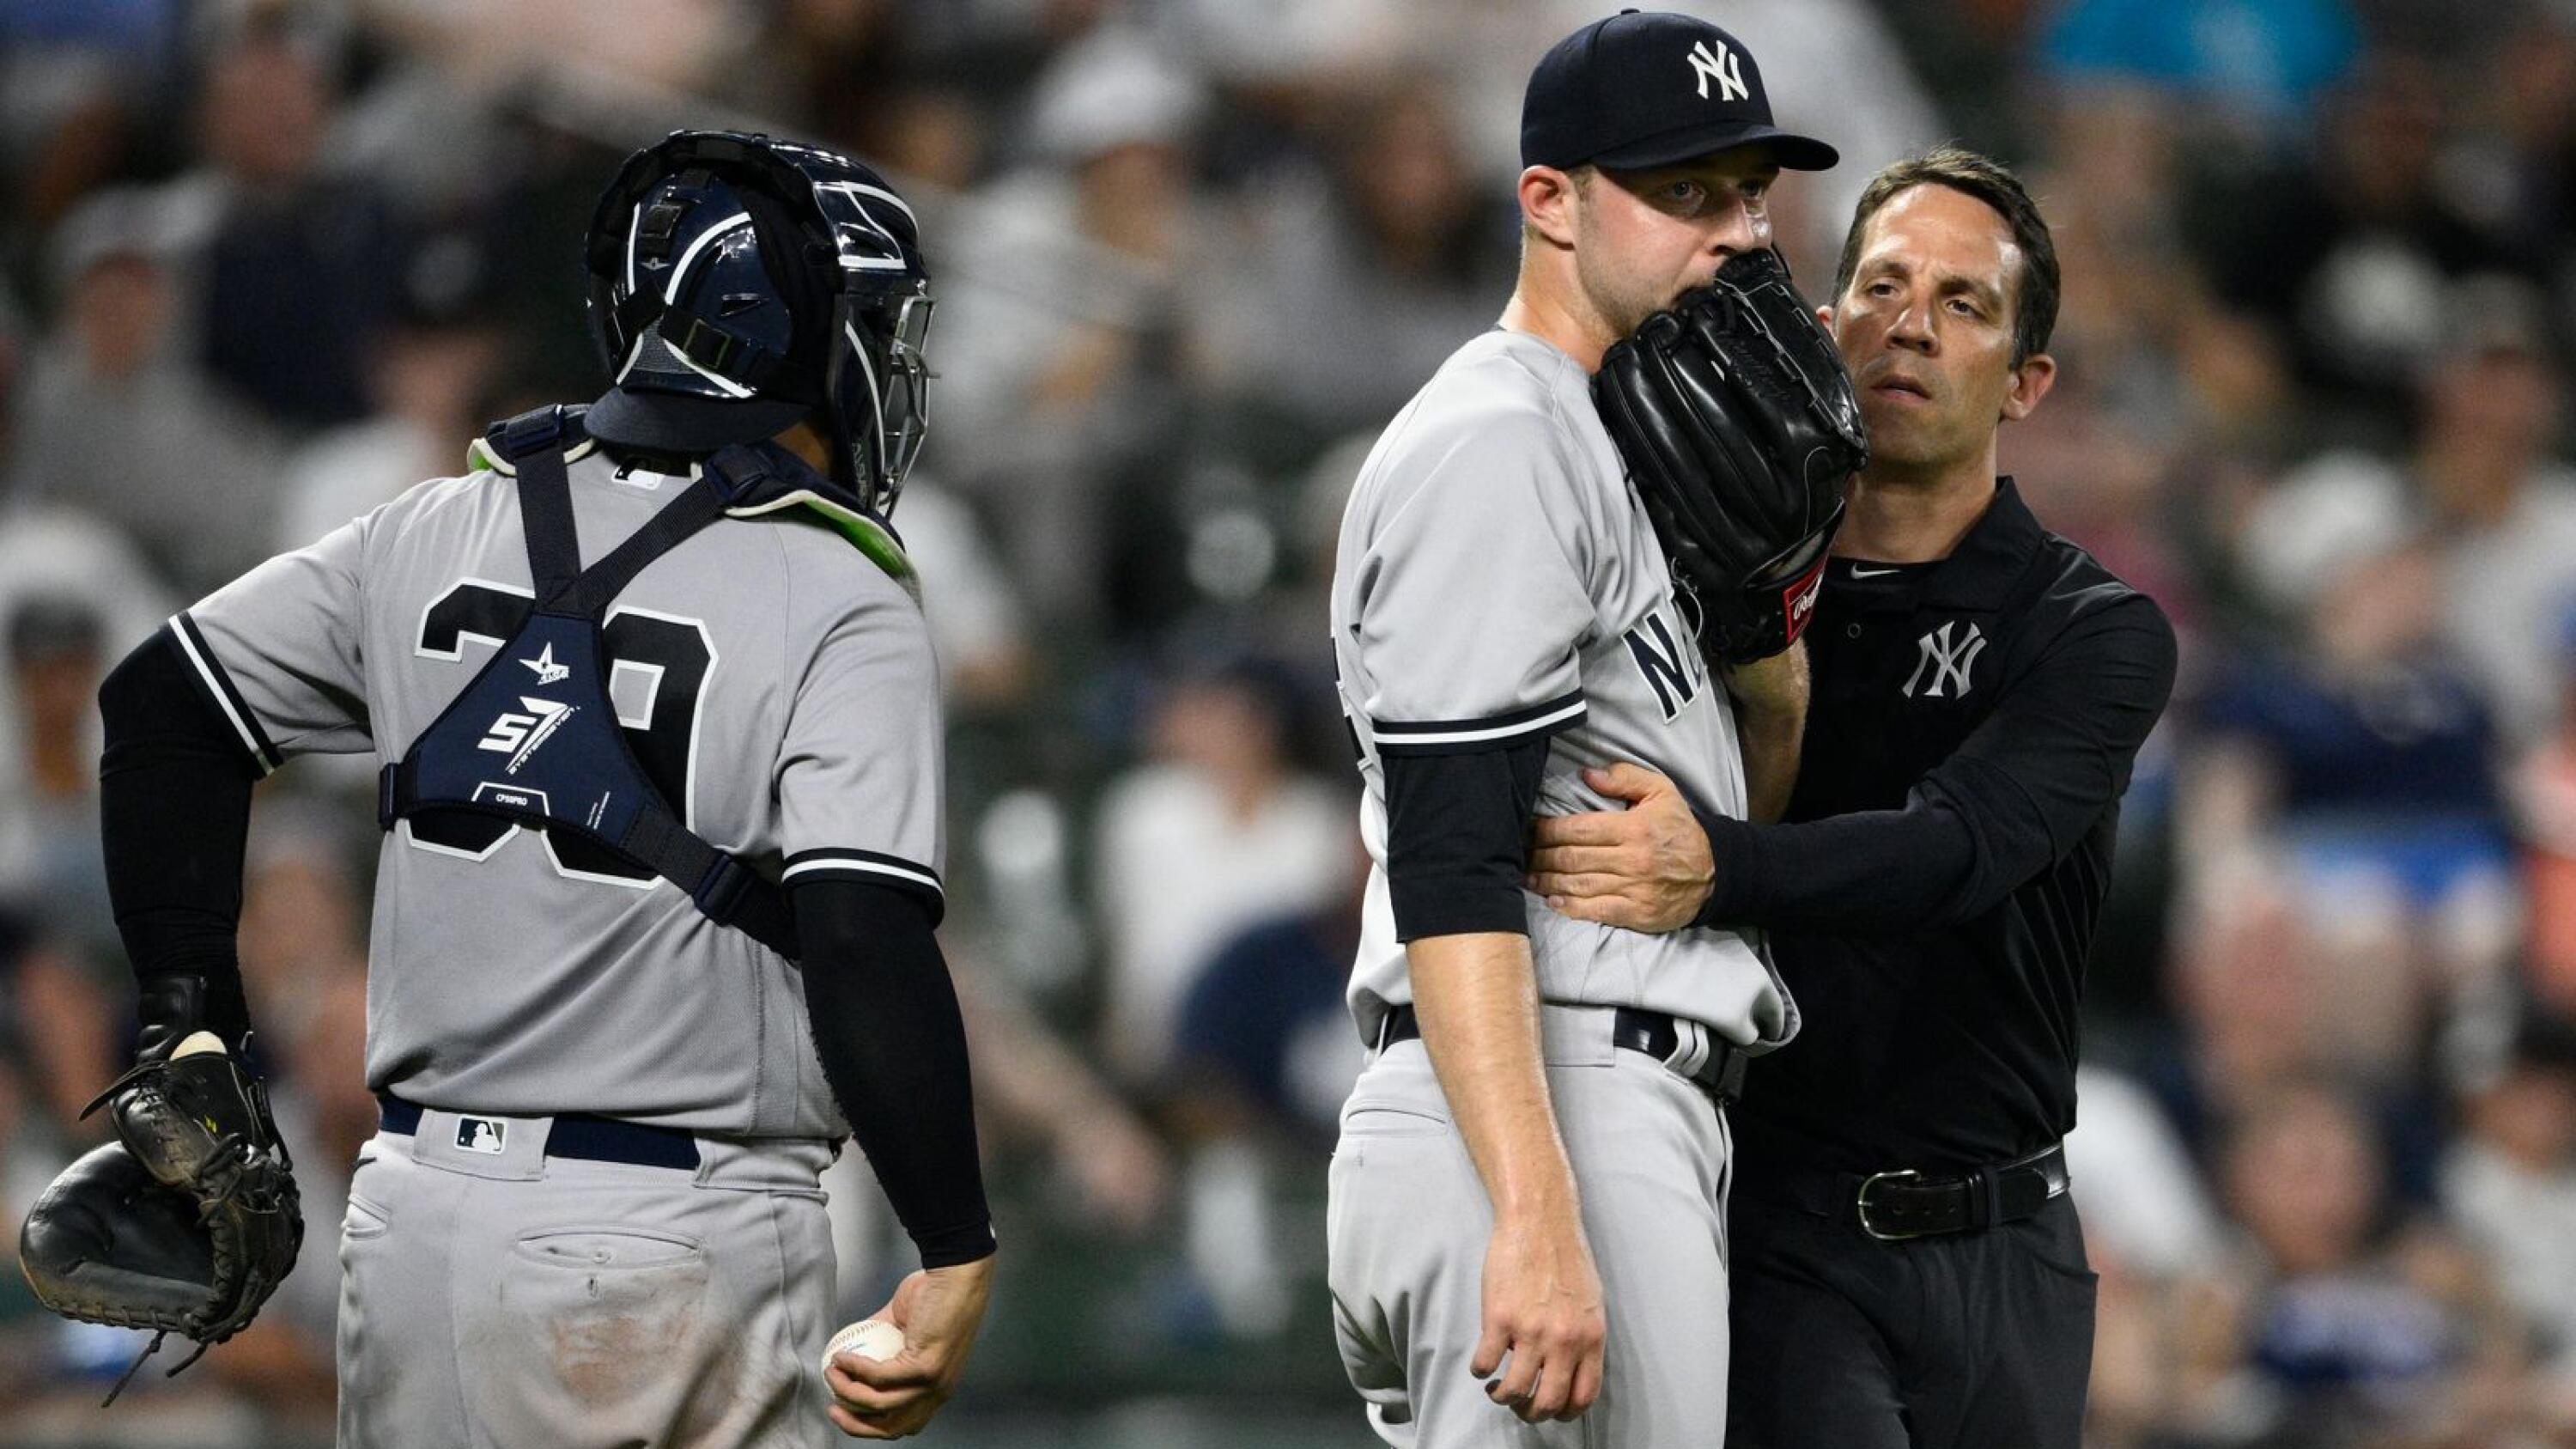 Yankees' Judge back in New York, could come off injured list to face Orioles